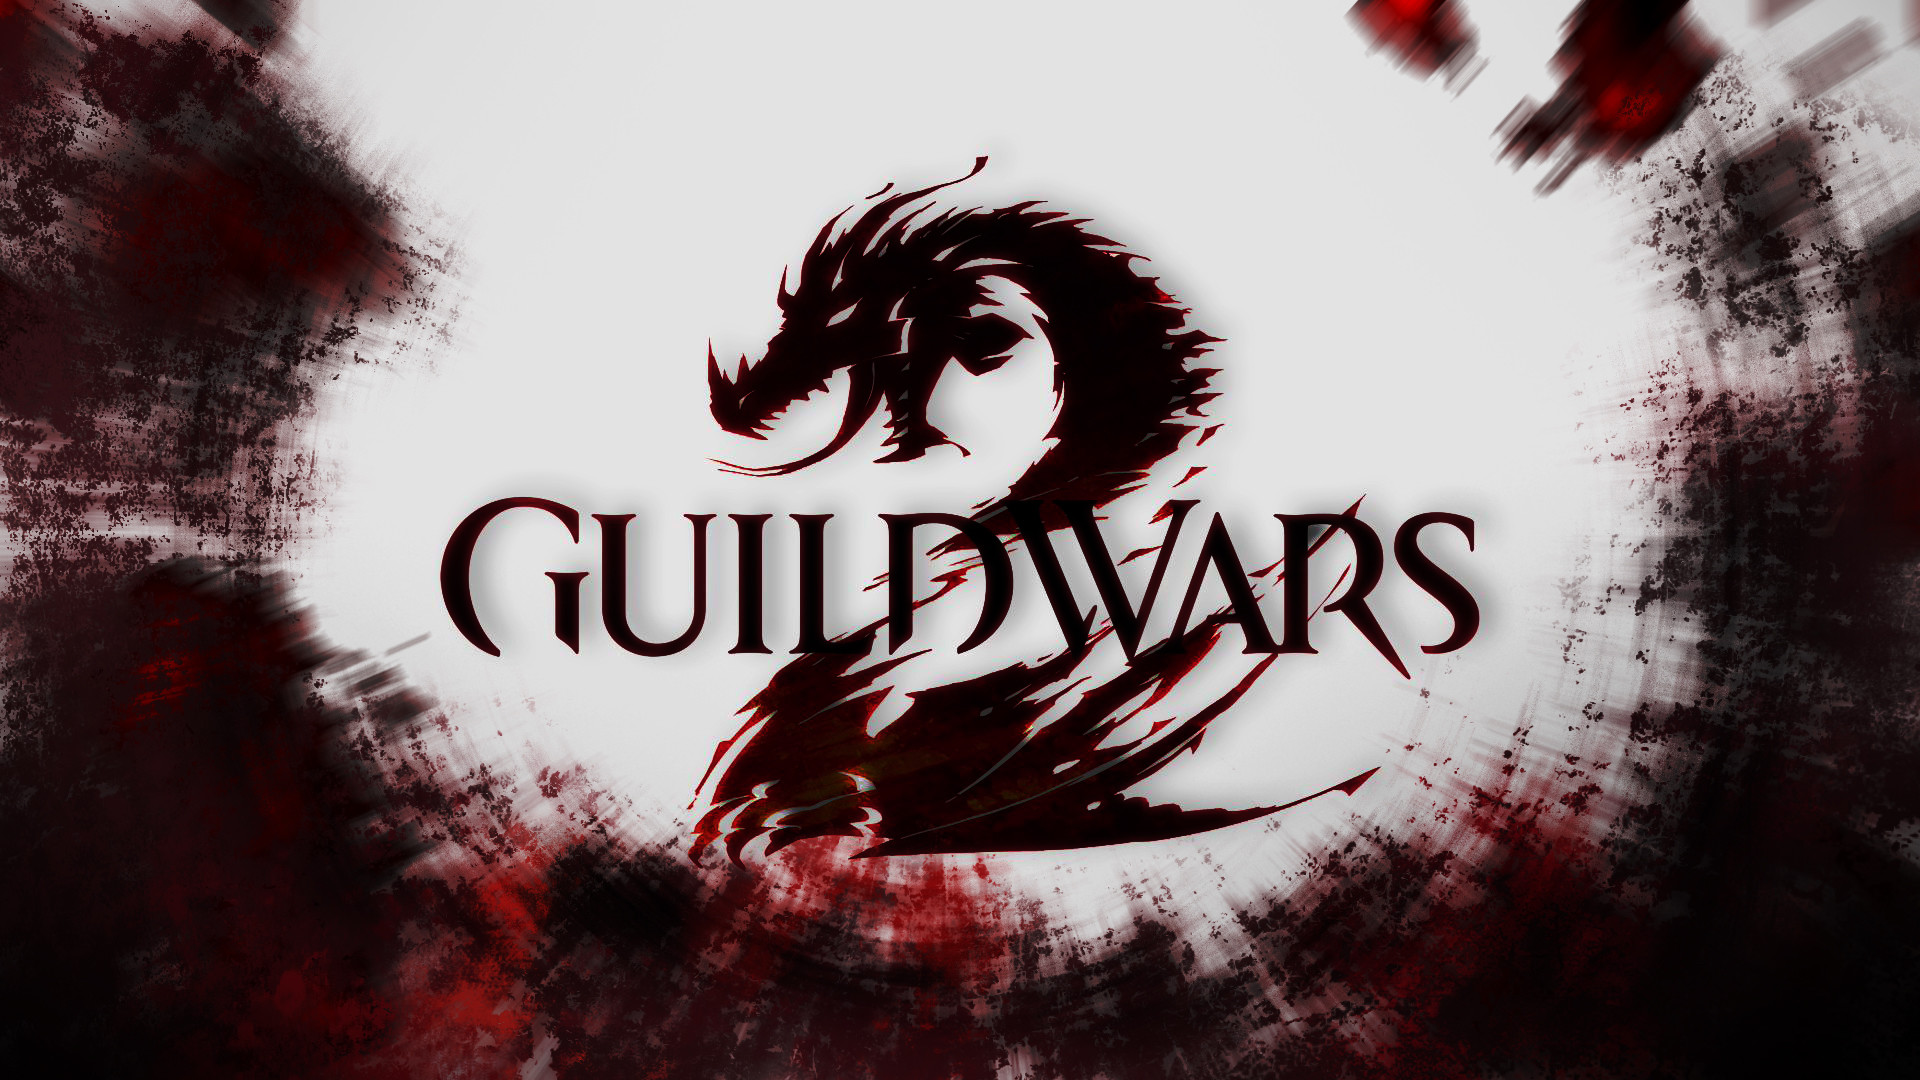 1920x1080 Guild Wars 2 Wallpapers in HD Page 5 